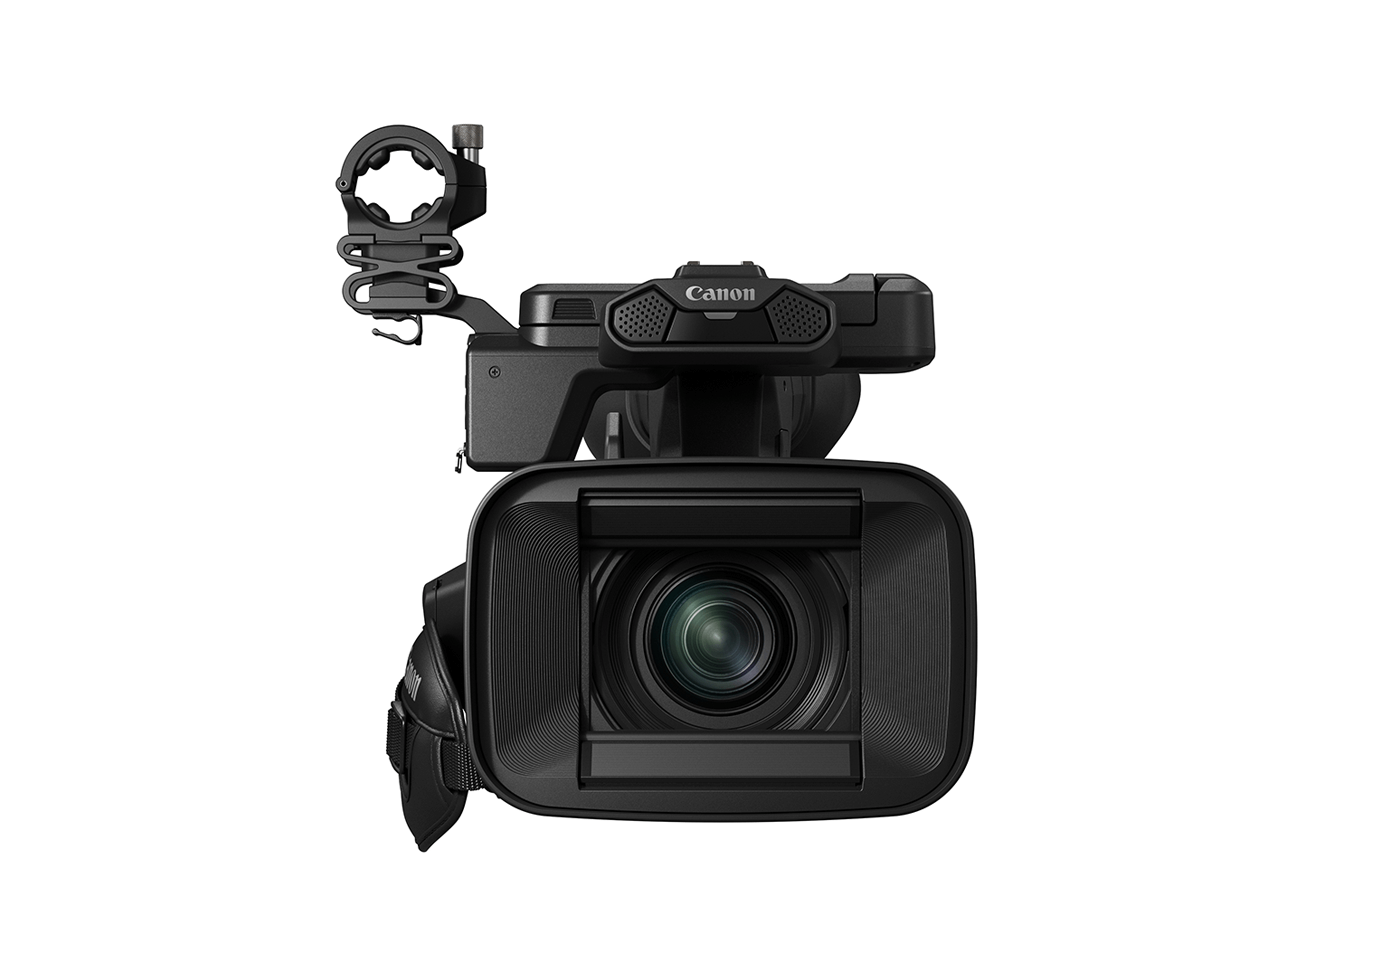 Front profile image of the XF605 video camera